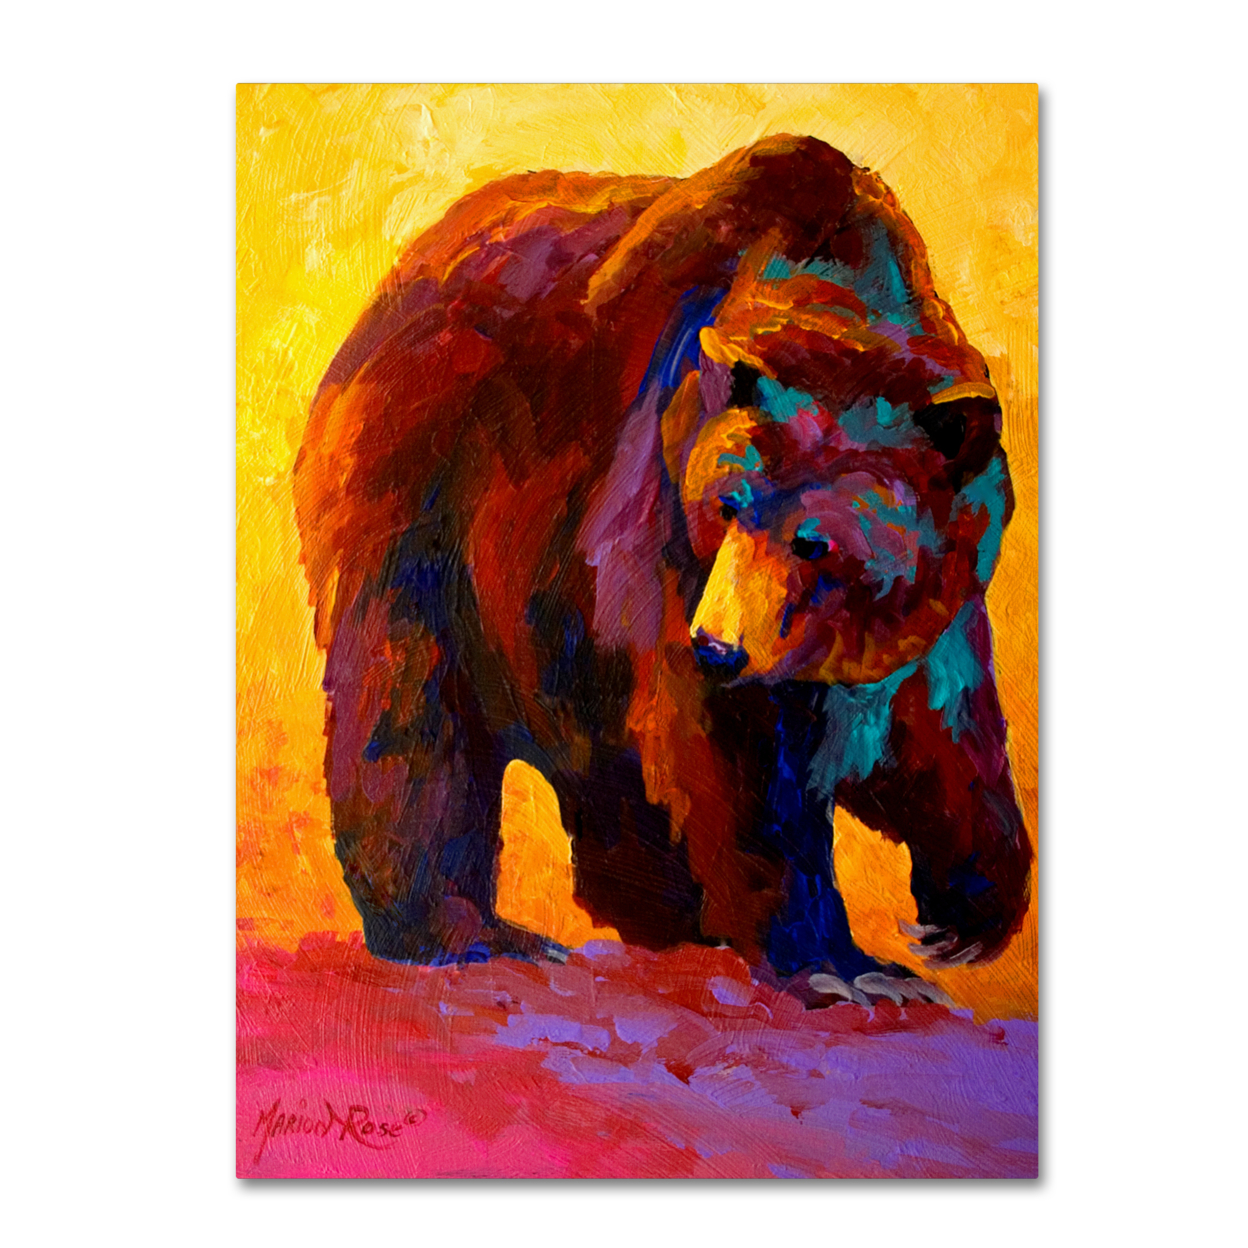 Marion Rose 'My Fish Grizz' Ready To Hang Canvas Art 24 X 32 Inches Made In USA